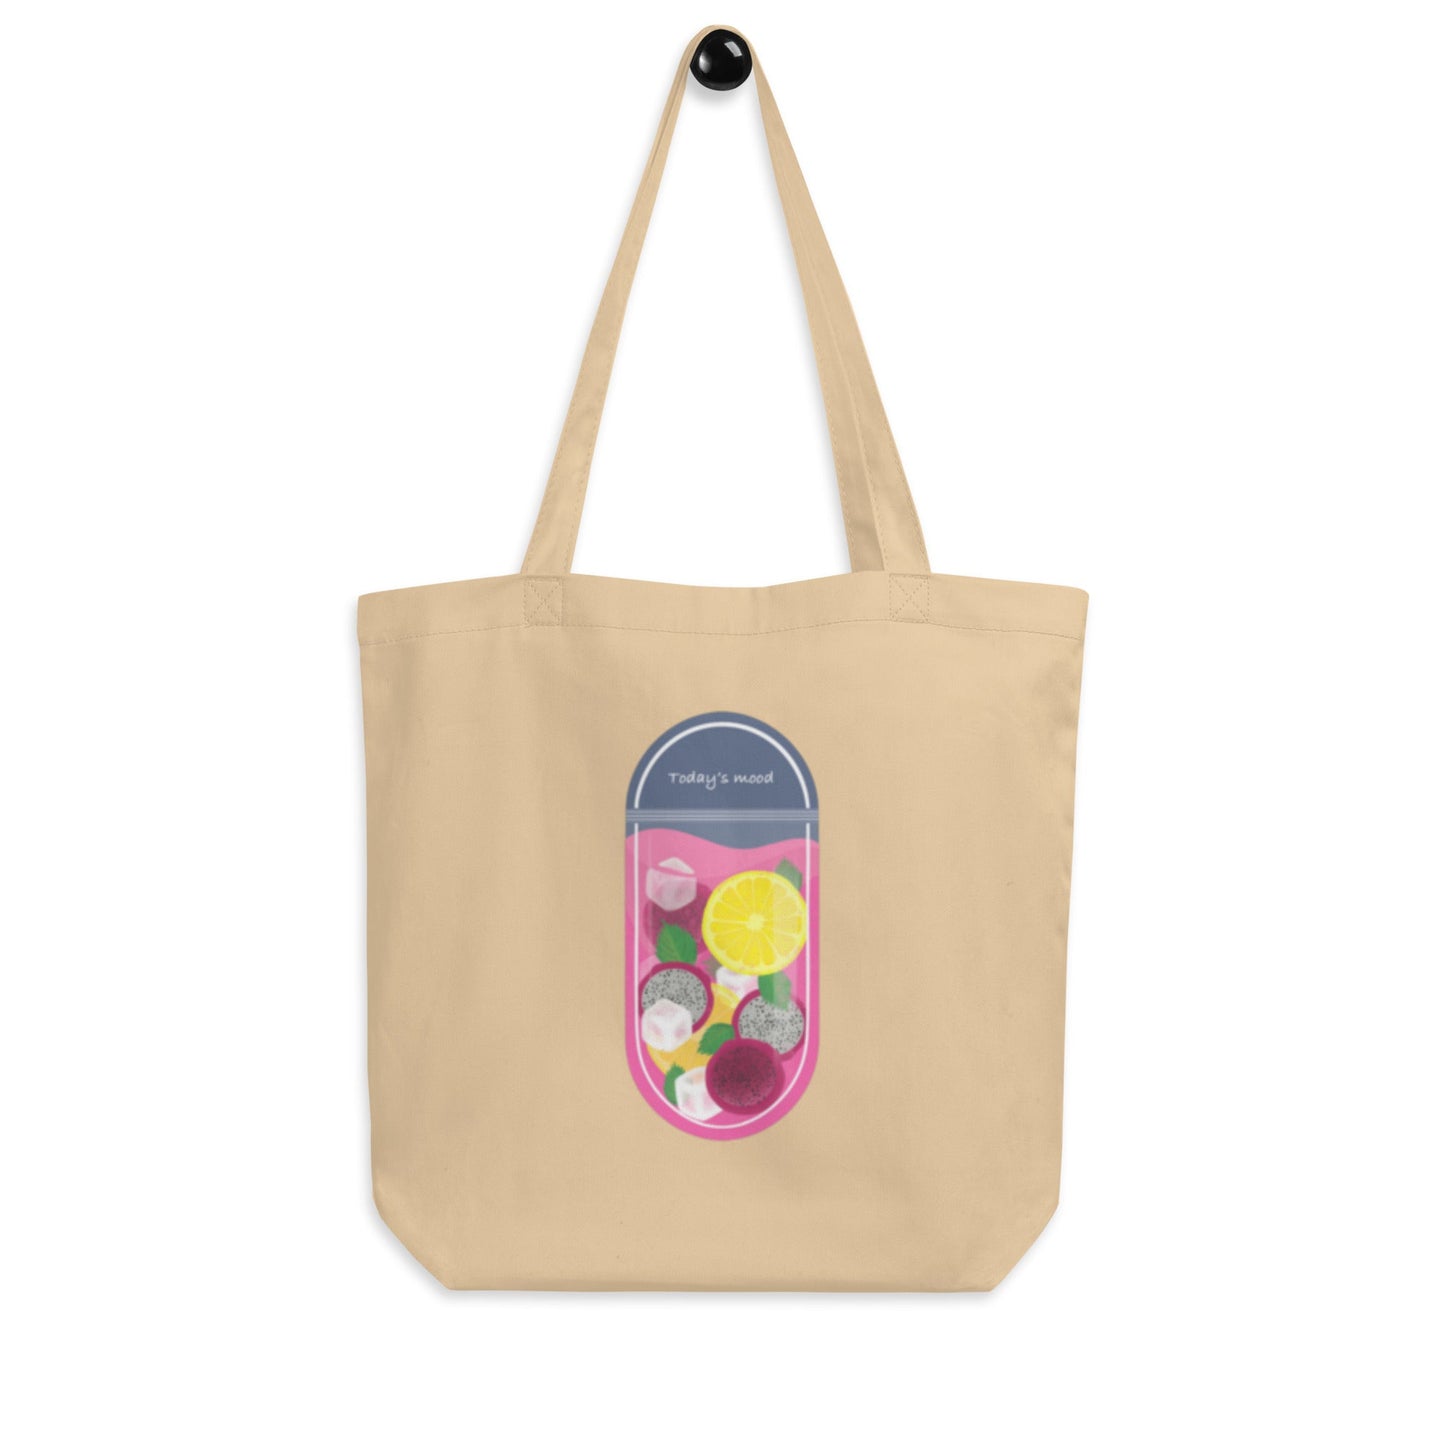 eco-tote-bag-todays-mood-14-oyster